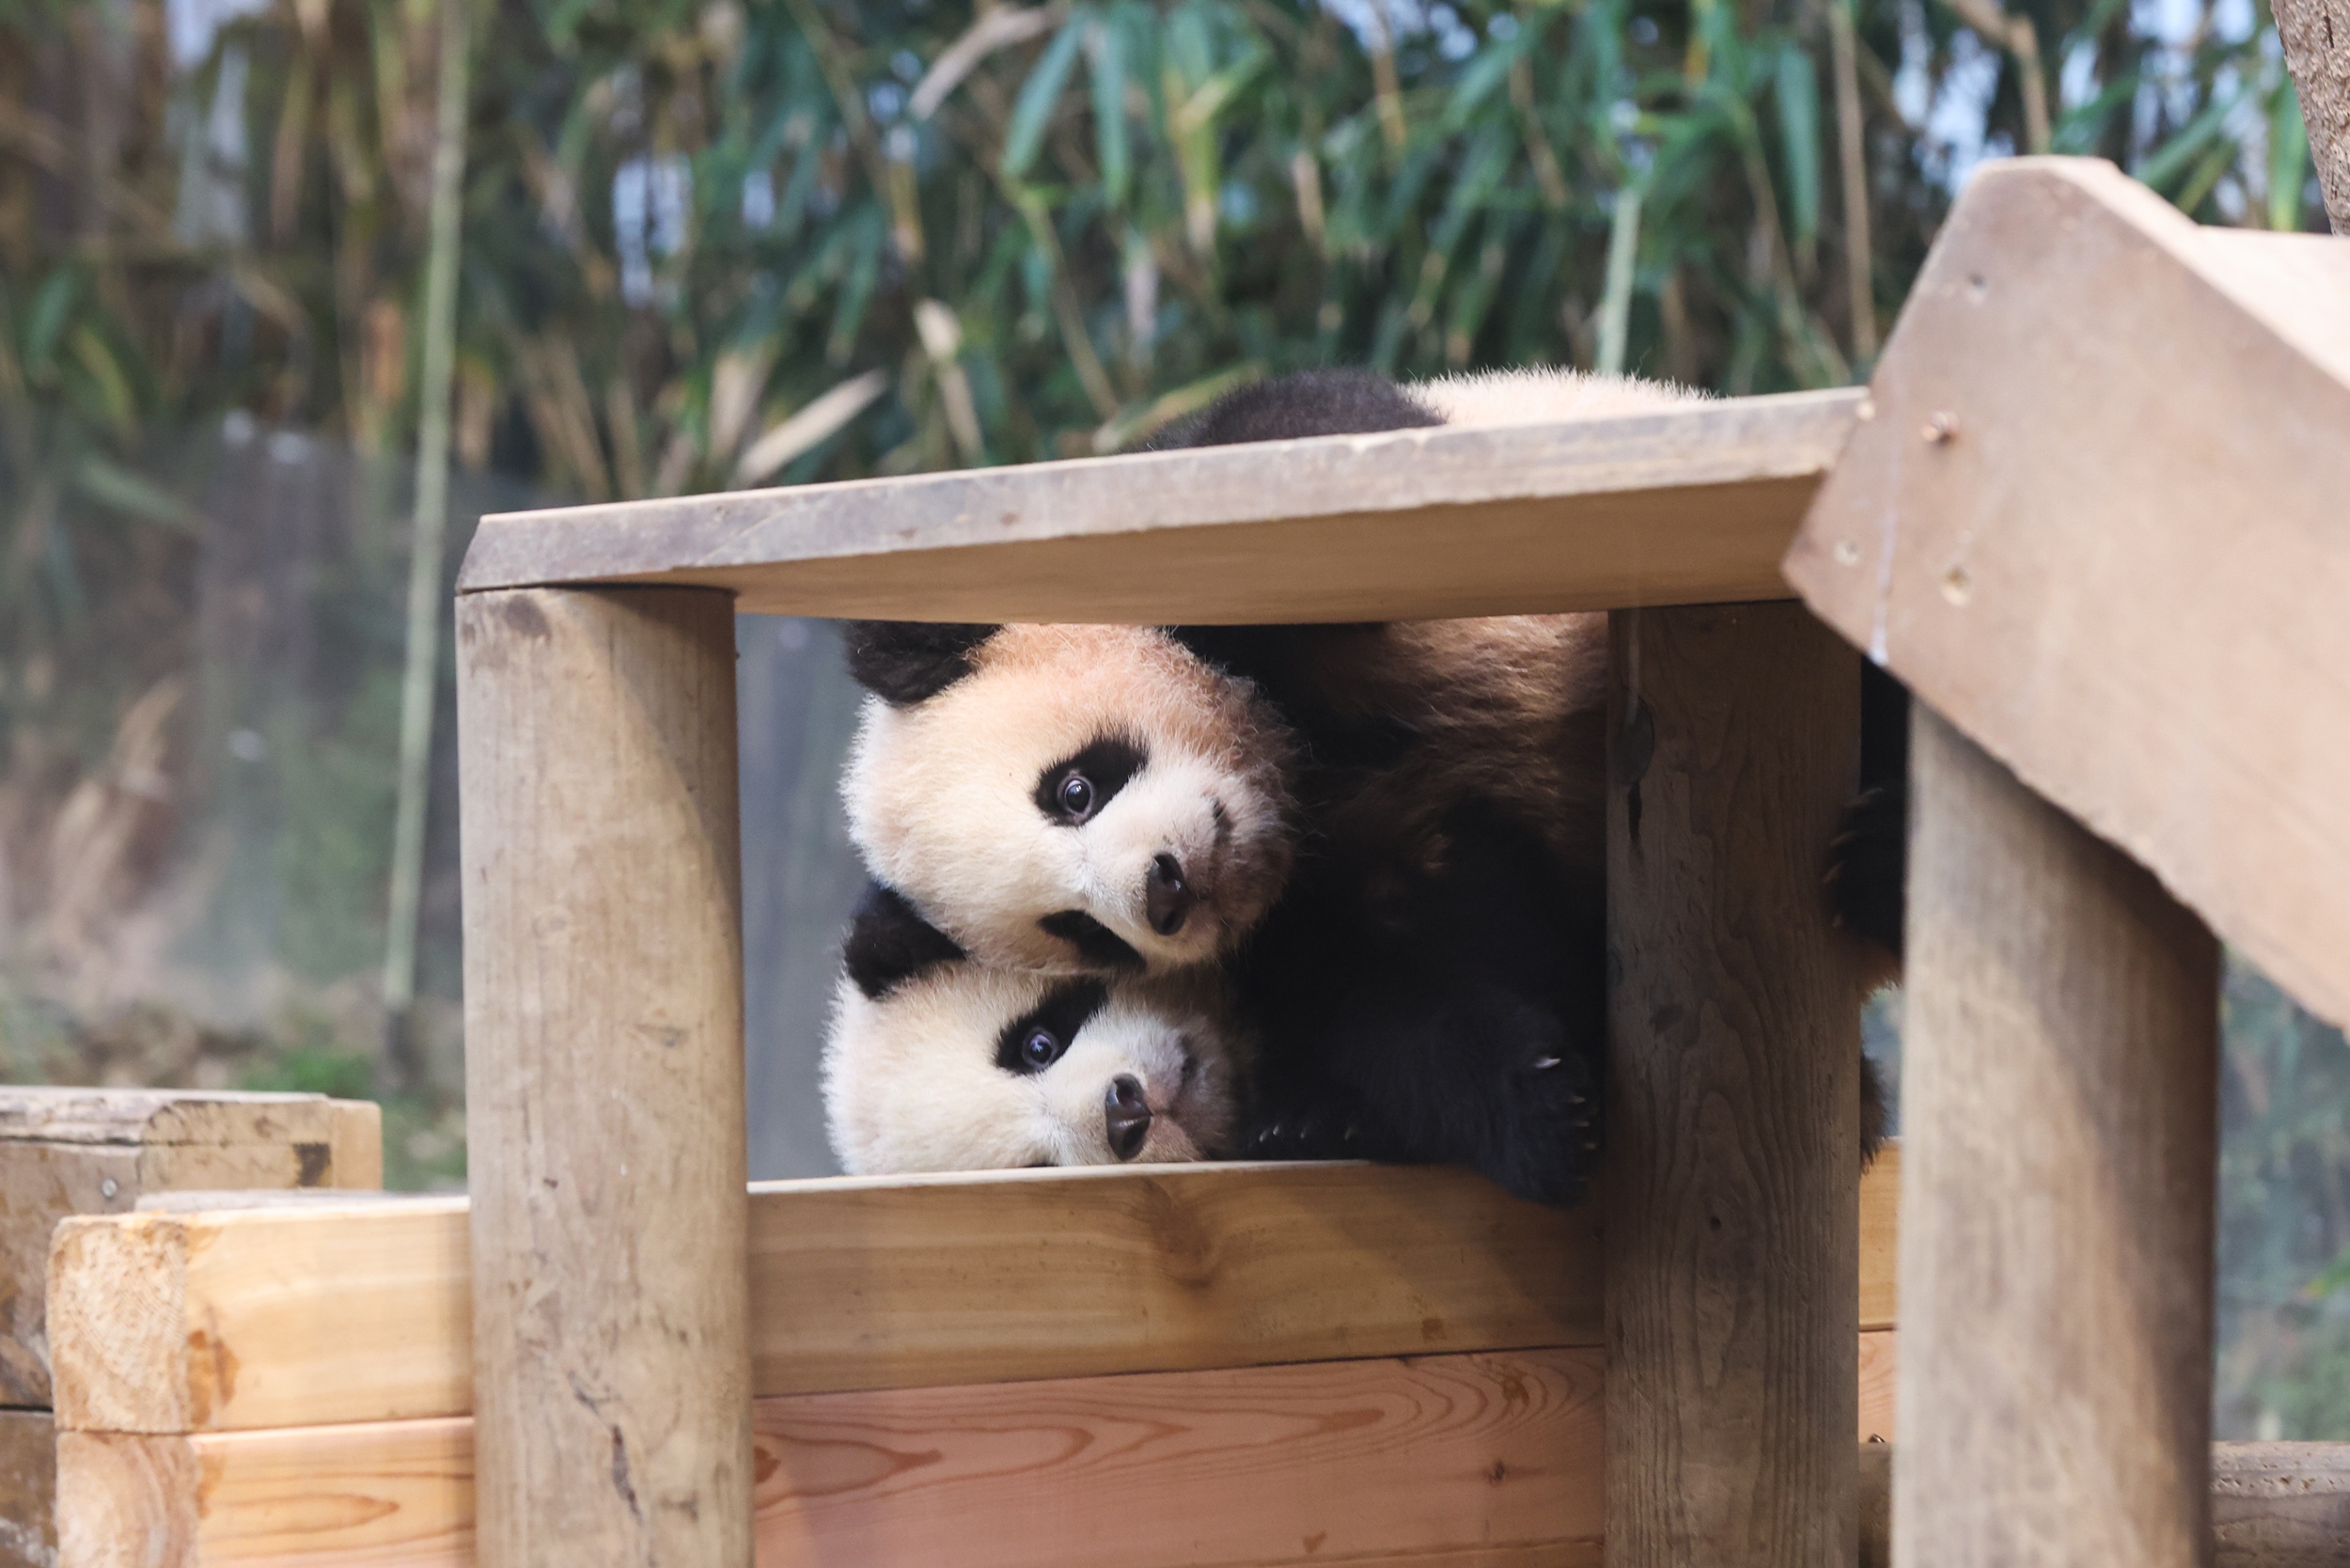 Peek-a-boo! Young pandas enjoy playing with each other on climbing equipment.